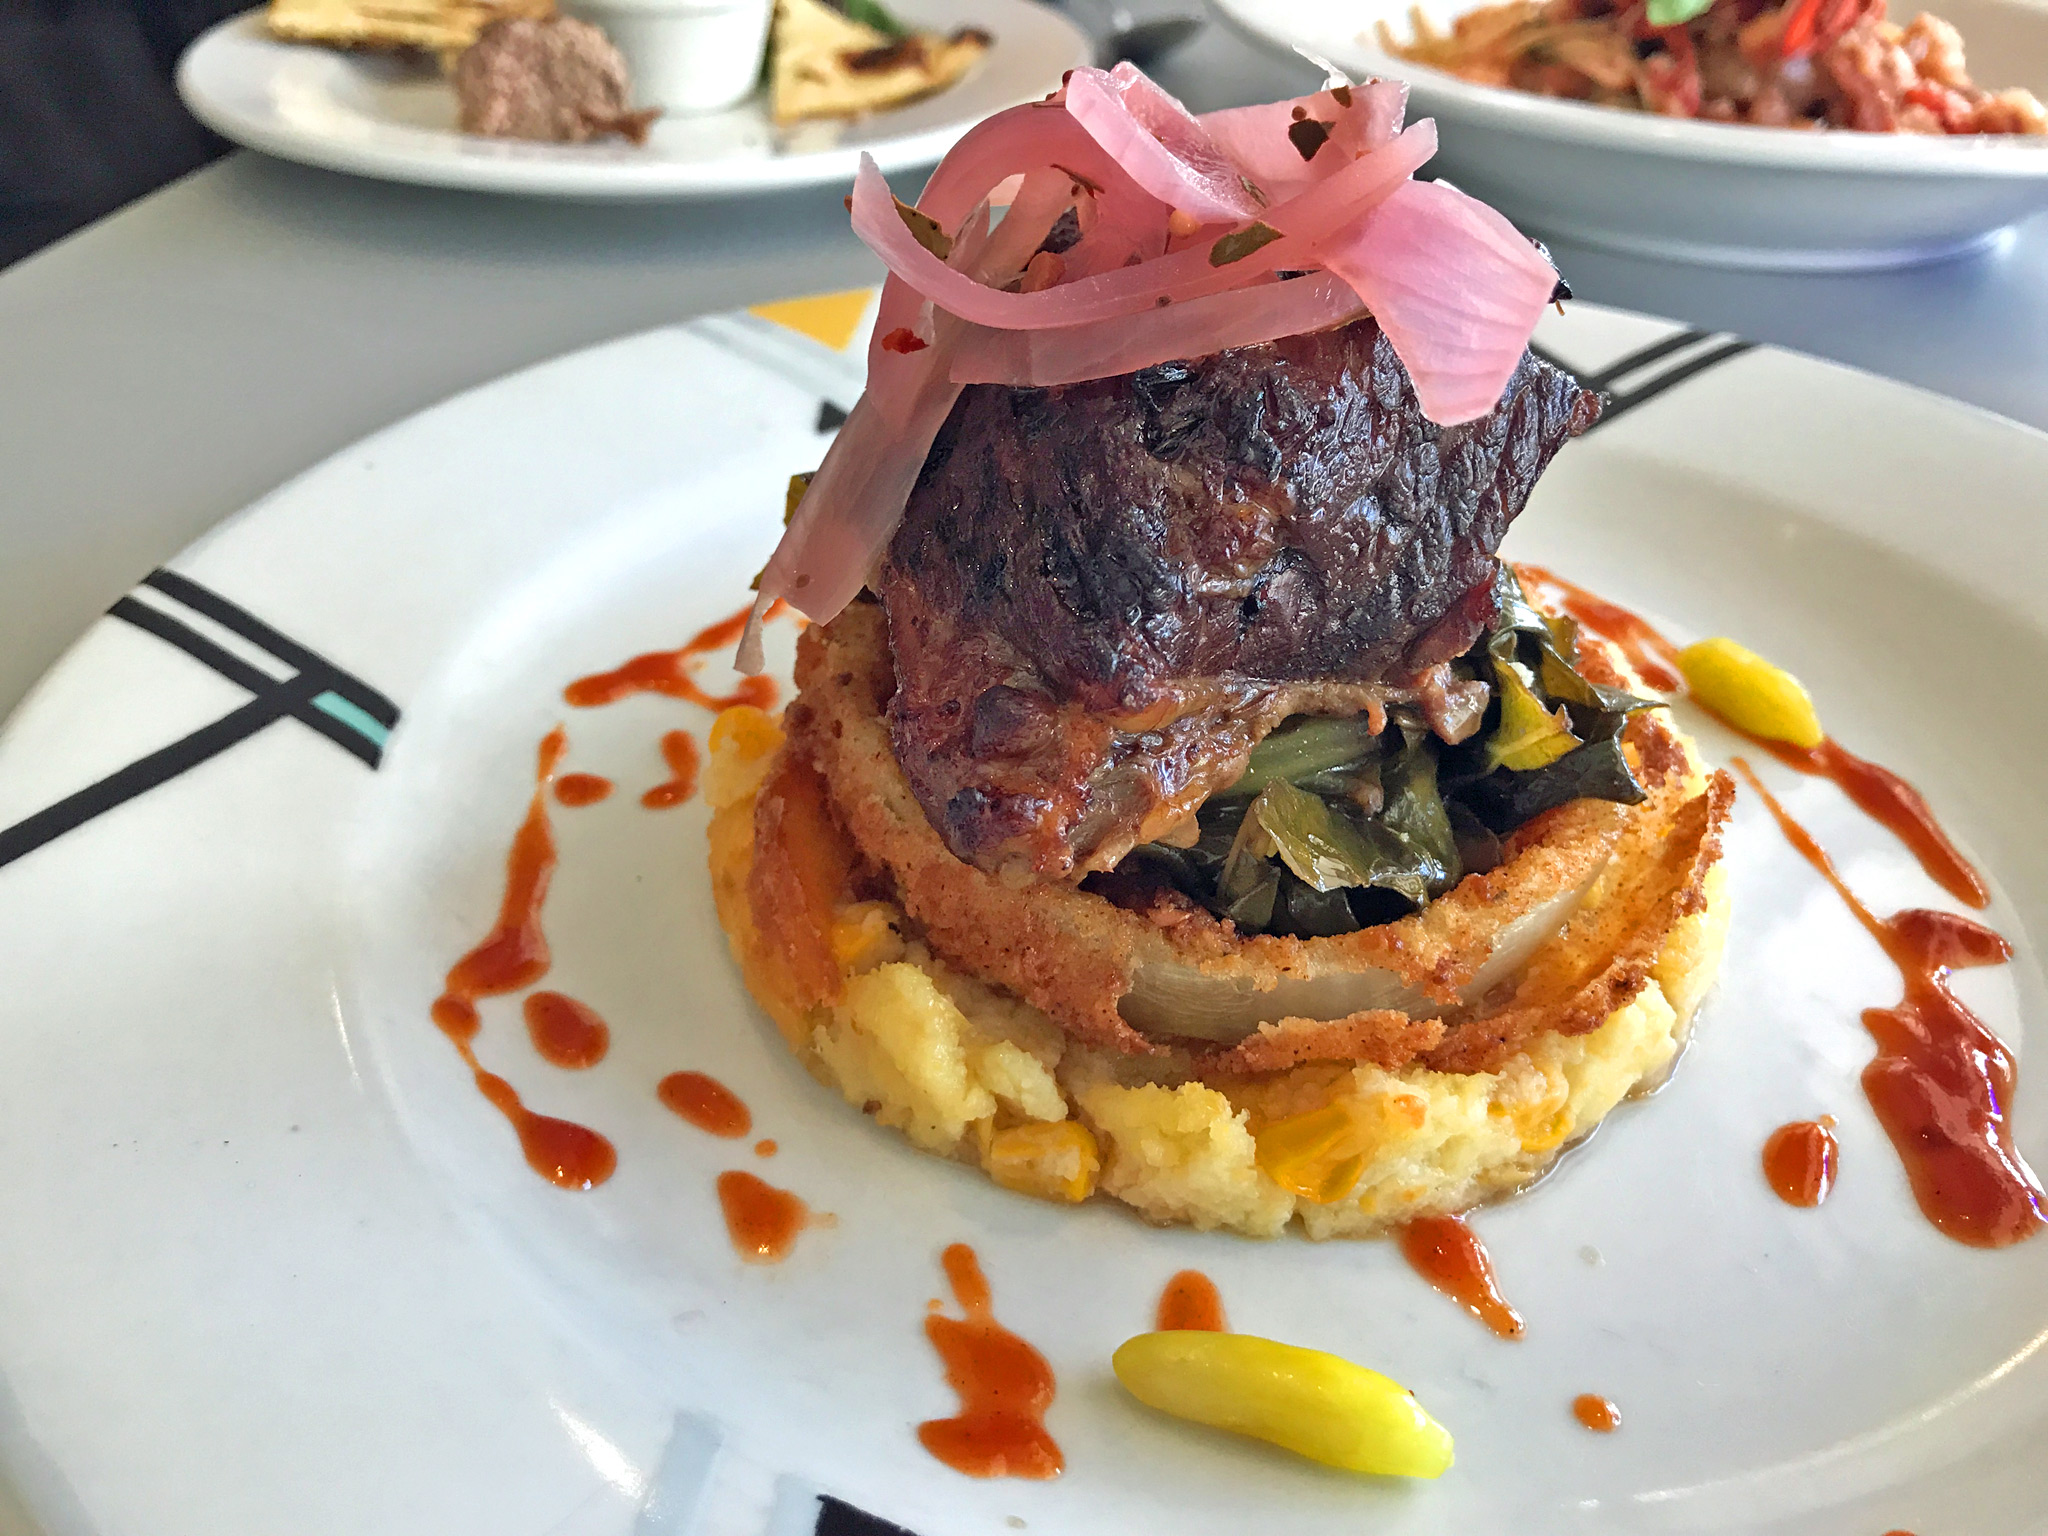 Braised short ribs, smokey collard greens, corn spoonbread, pickled onions, onion ring, and house-made BBQ sauce